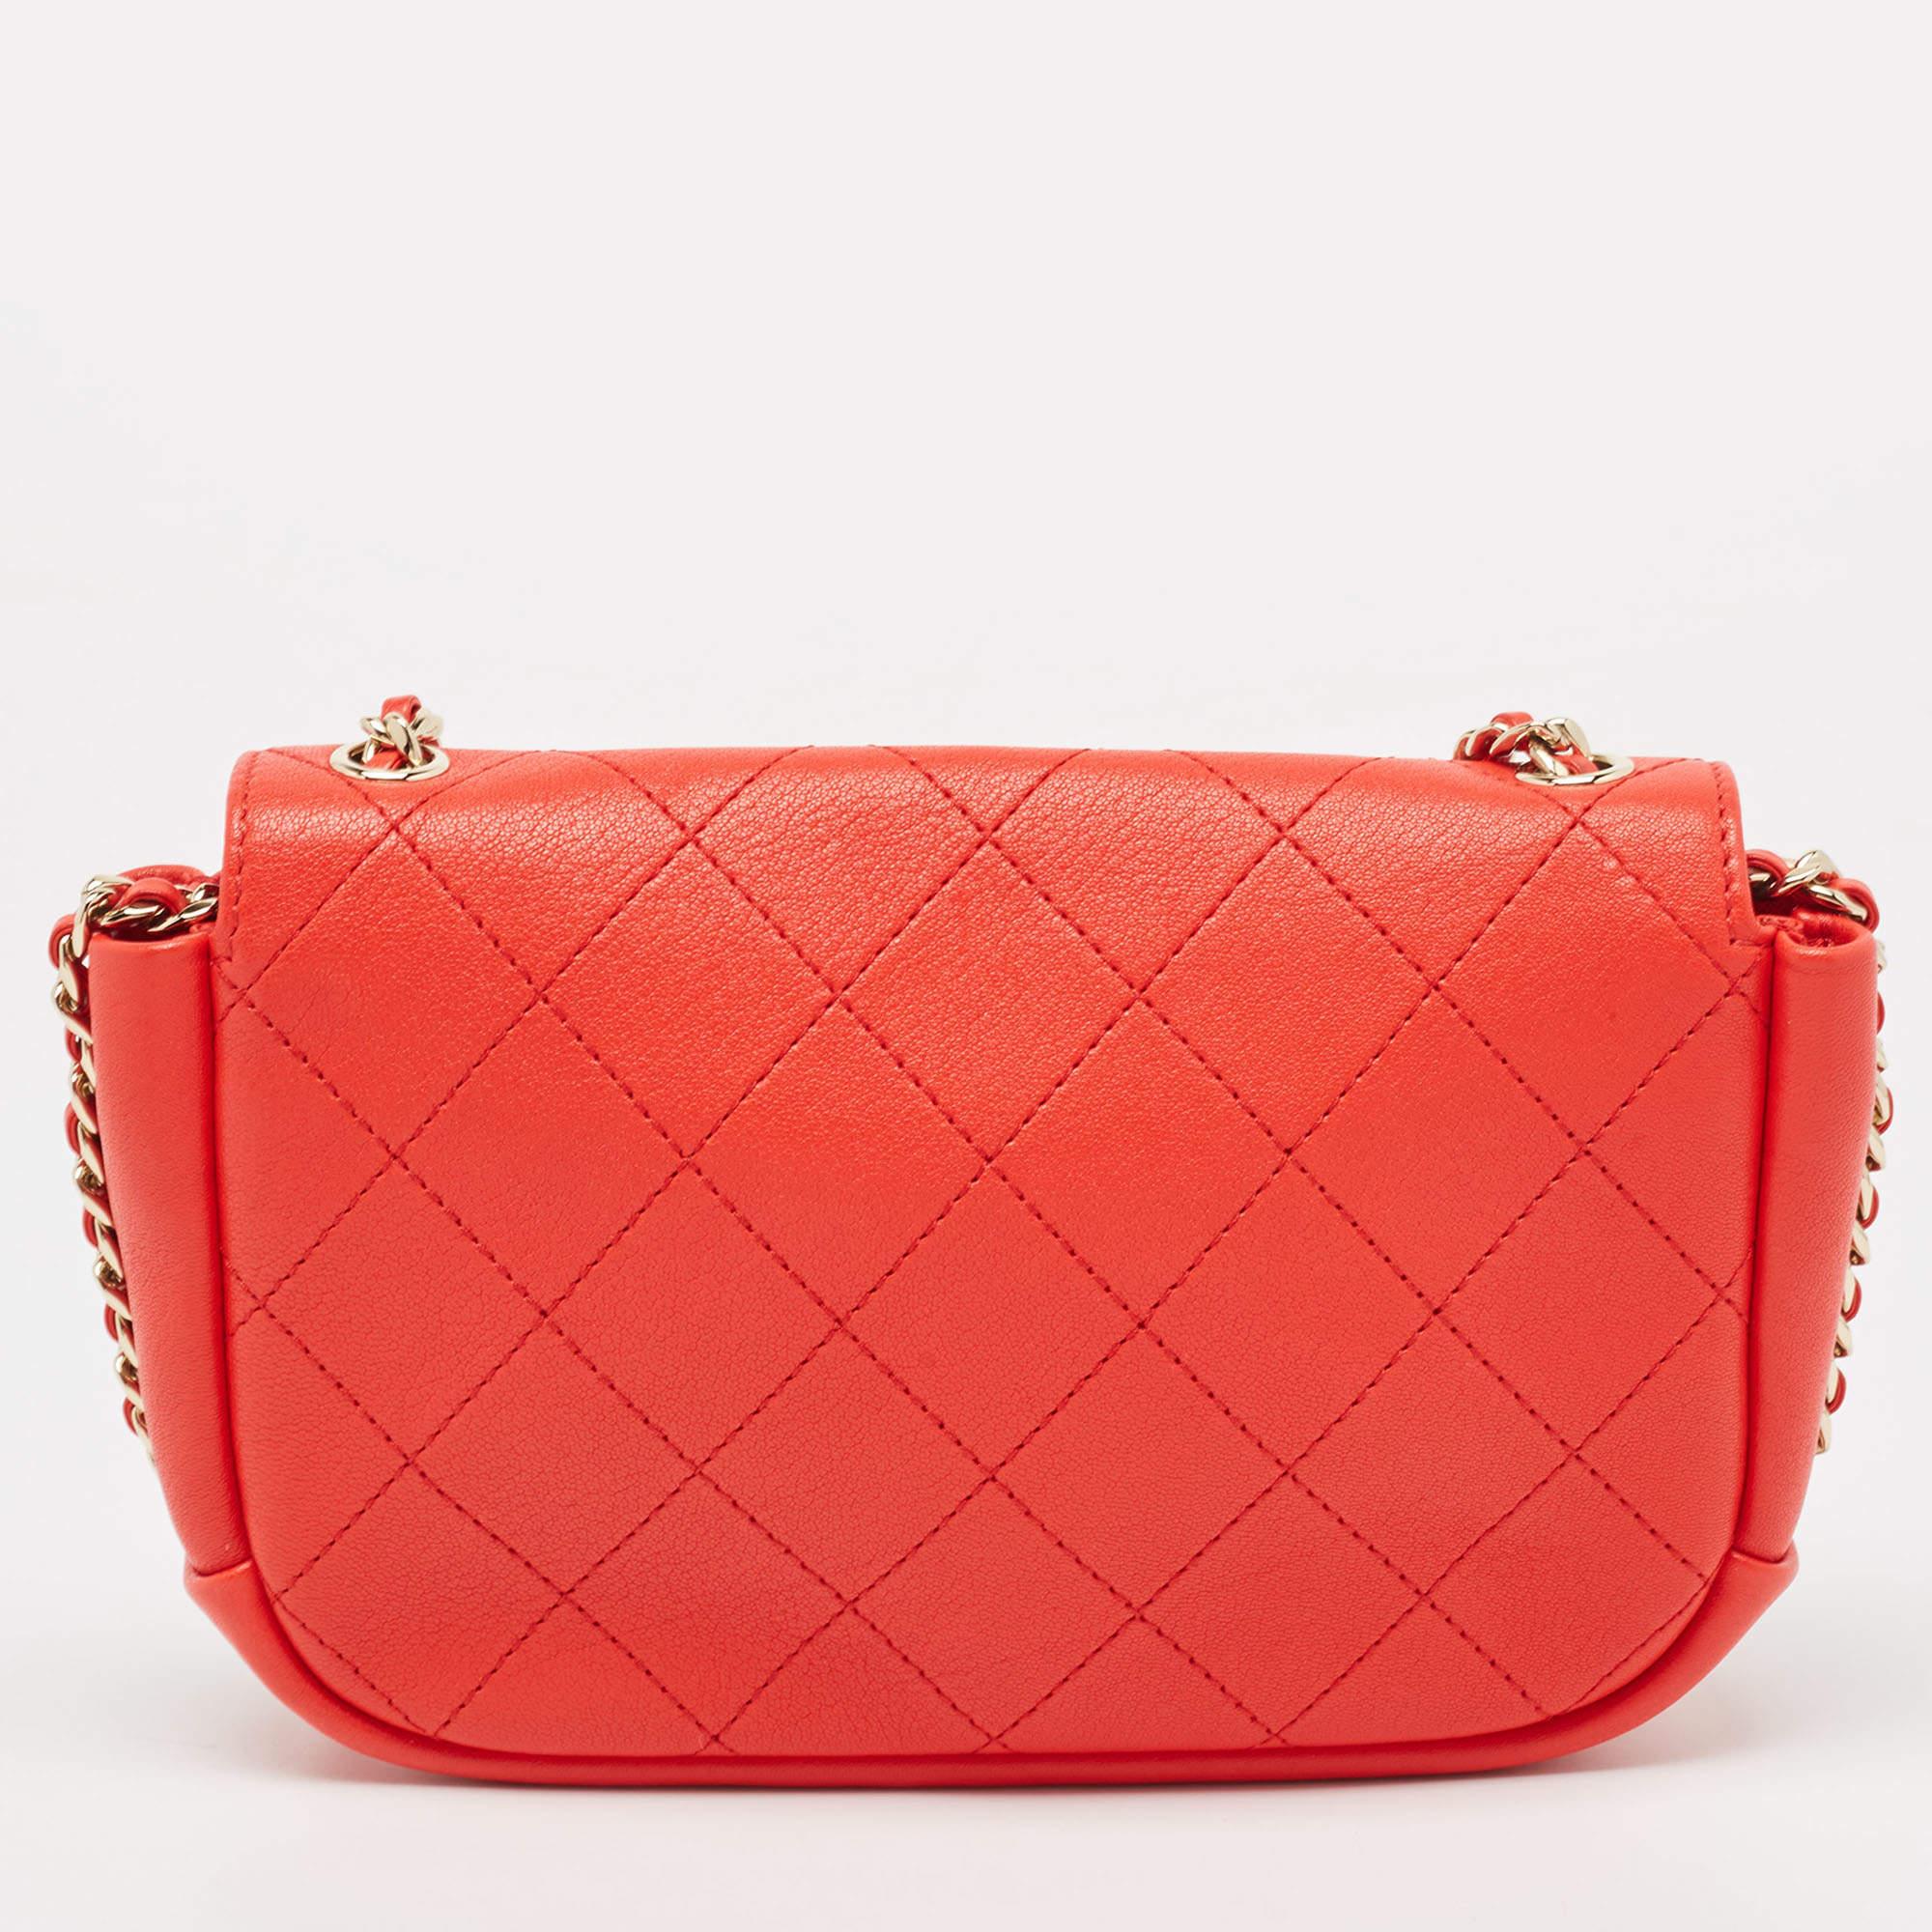 Chanel Red Quilted Leather Small Casual Trip Flap Bag For Sale 1